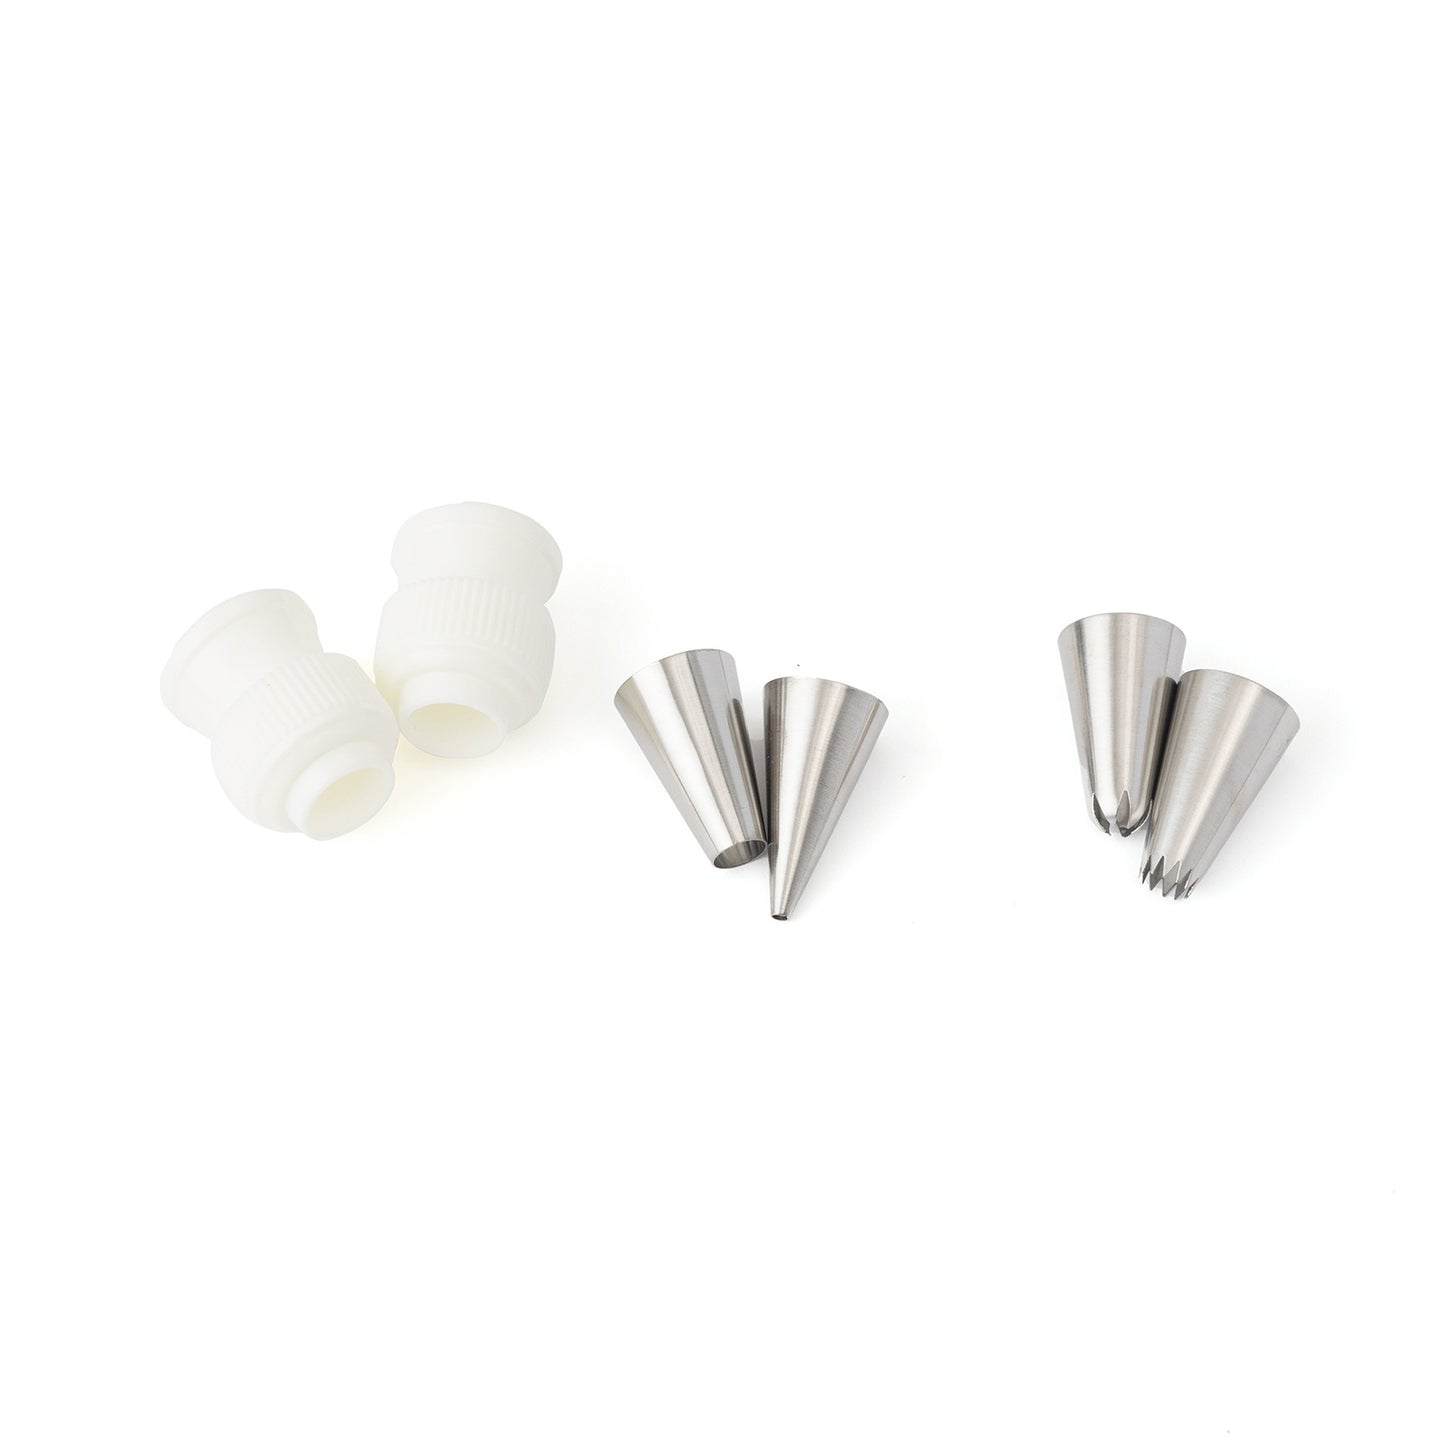 Sweetshop Piping Tips And Couplers 6/Pkg